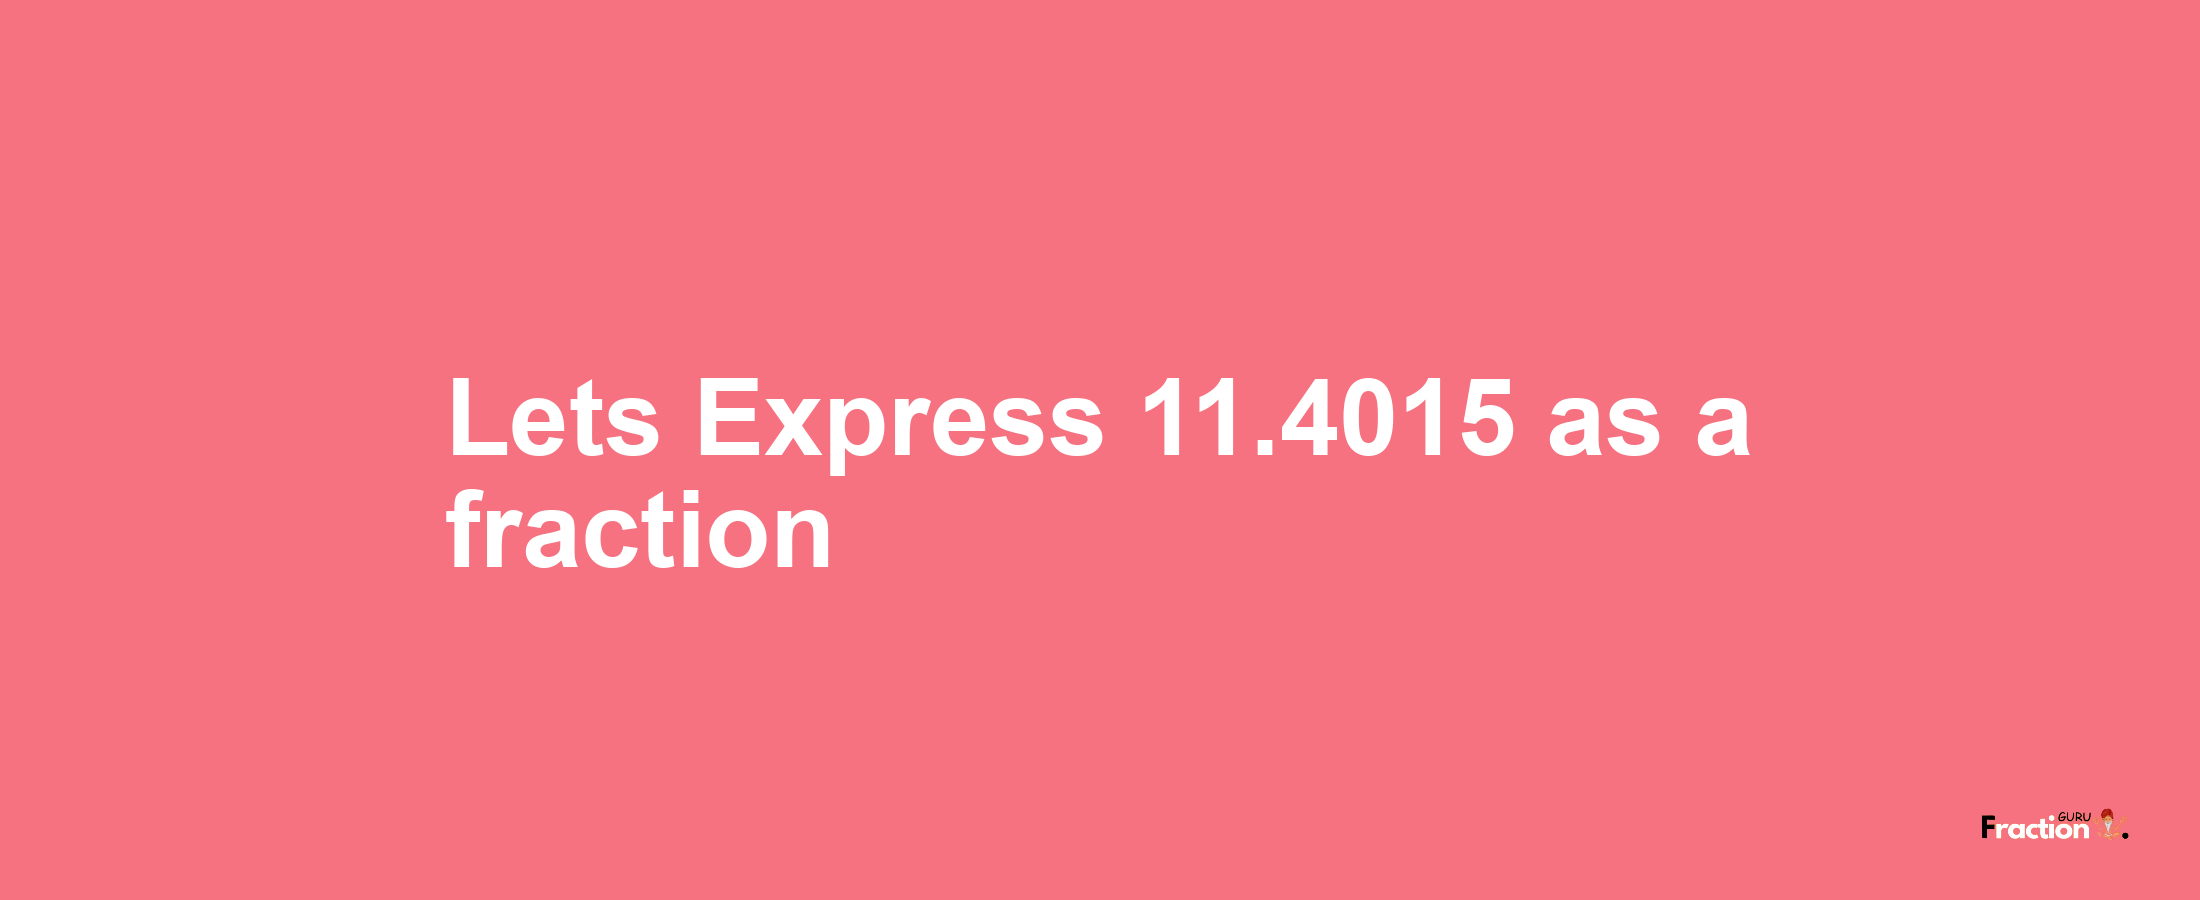 Lets Express 11.4015 as afraction